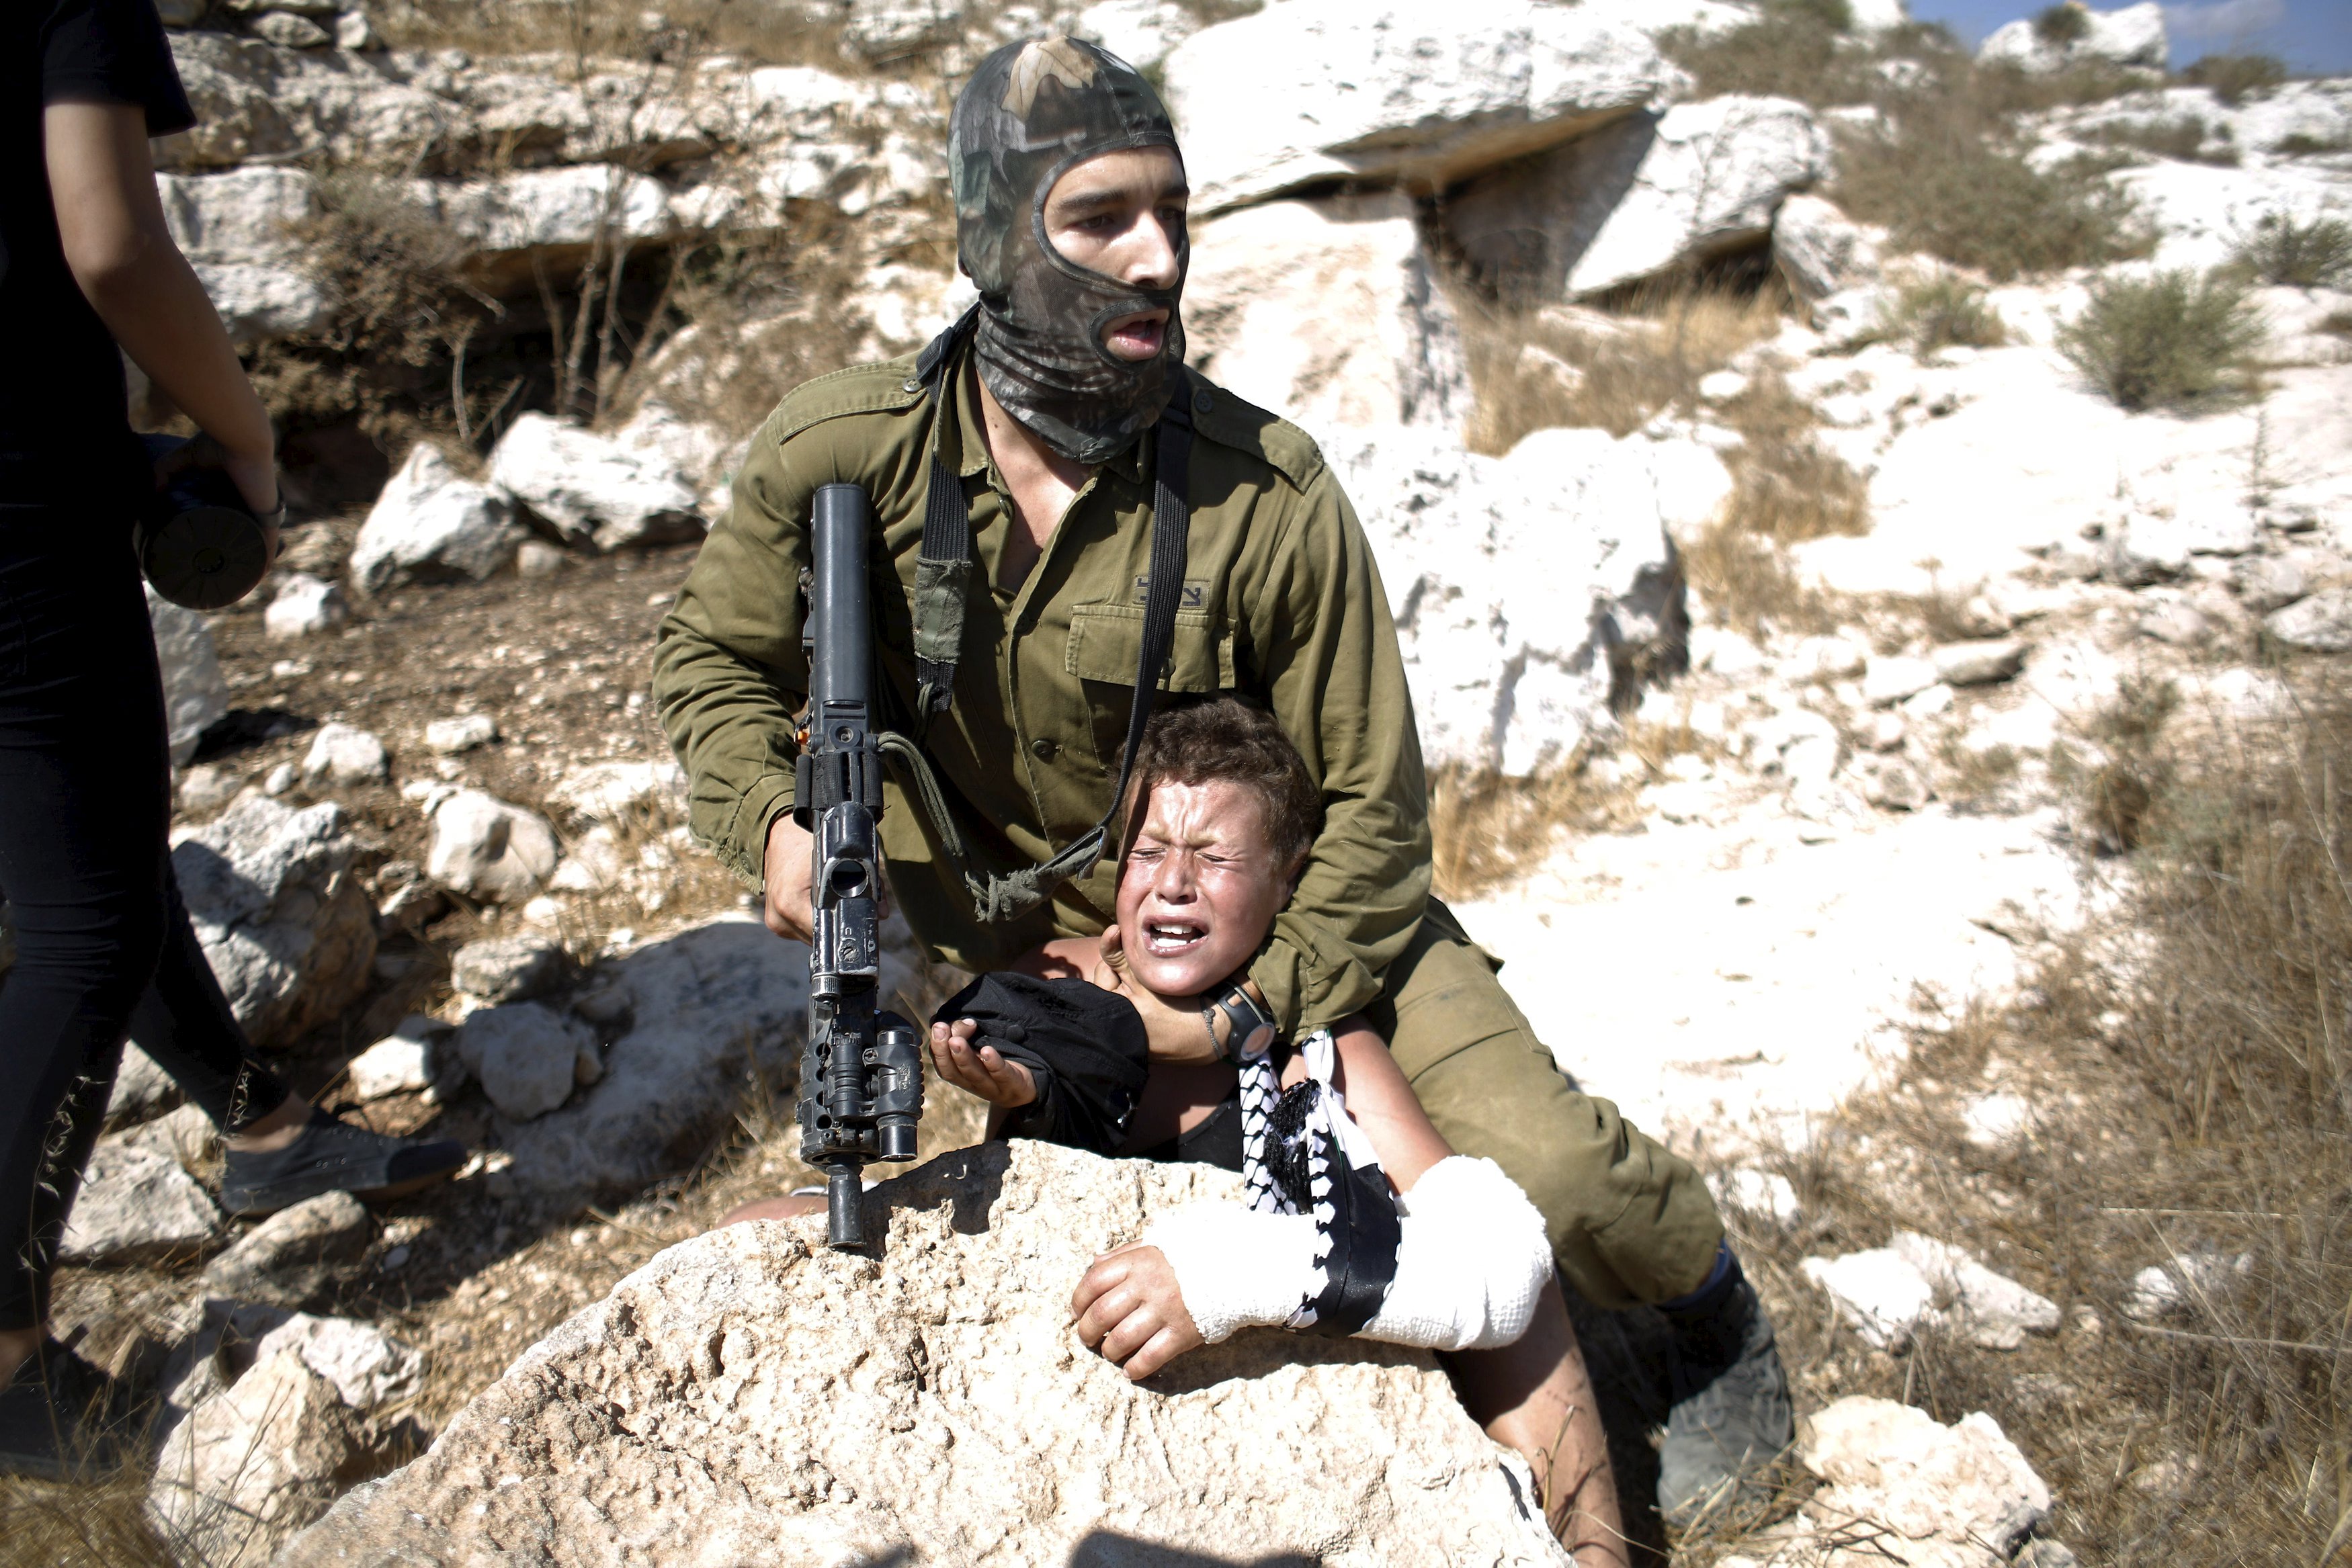 An Israeli soldier detains a Palestinian boy during a protest against Jewish settlements in the West Bank village of Nabi Saleh, near Ramallah August 28, 2015. REUTERS/Mohamad Torokman 